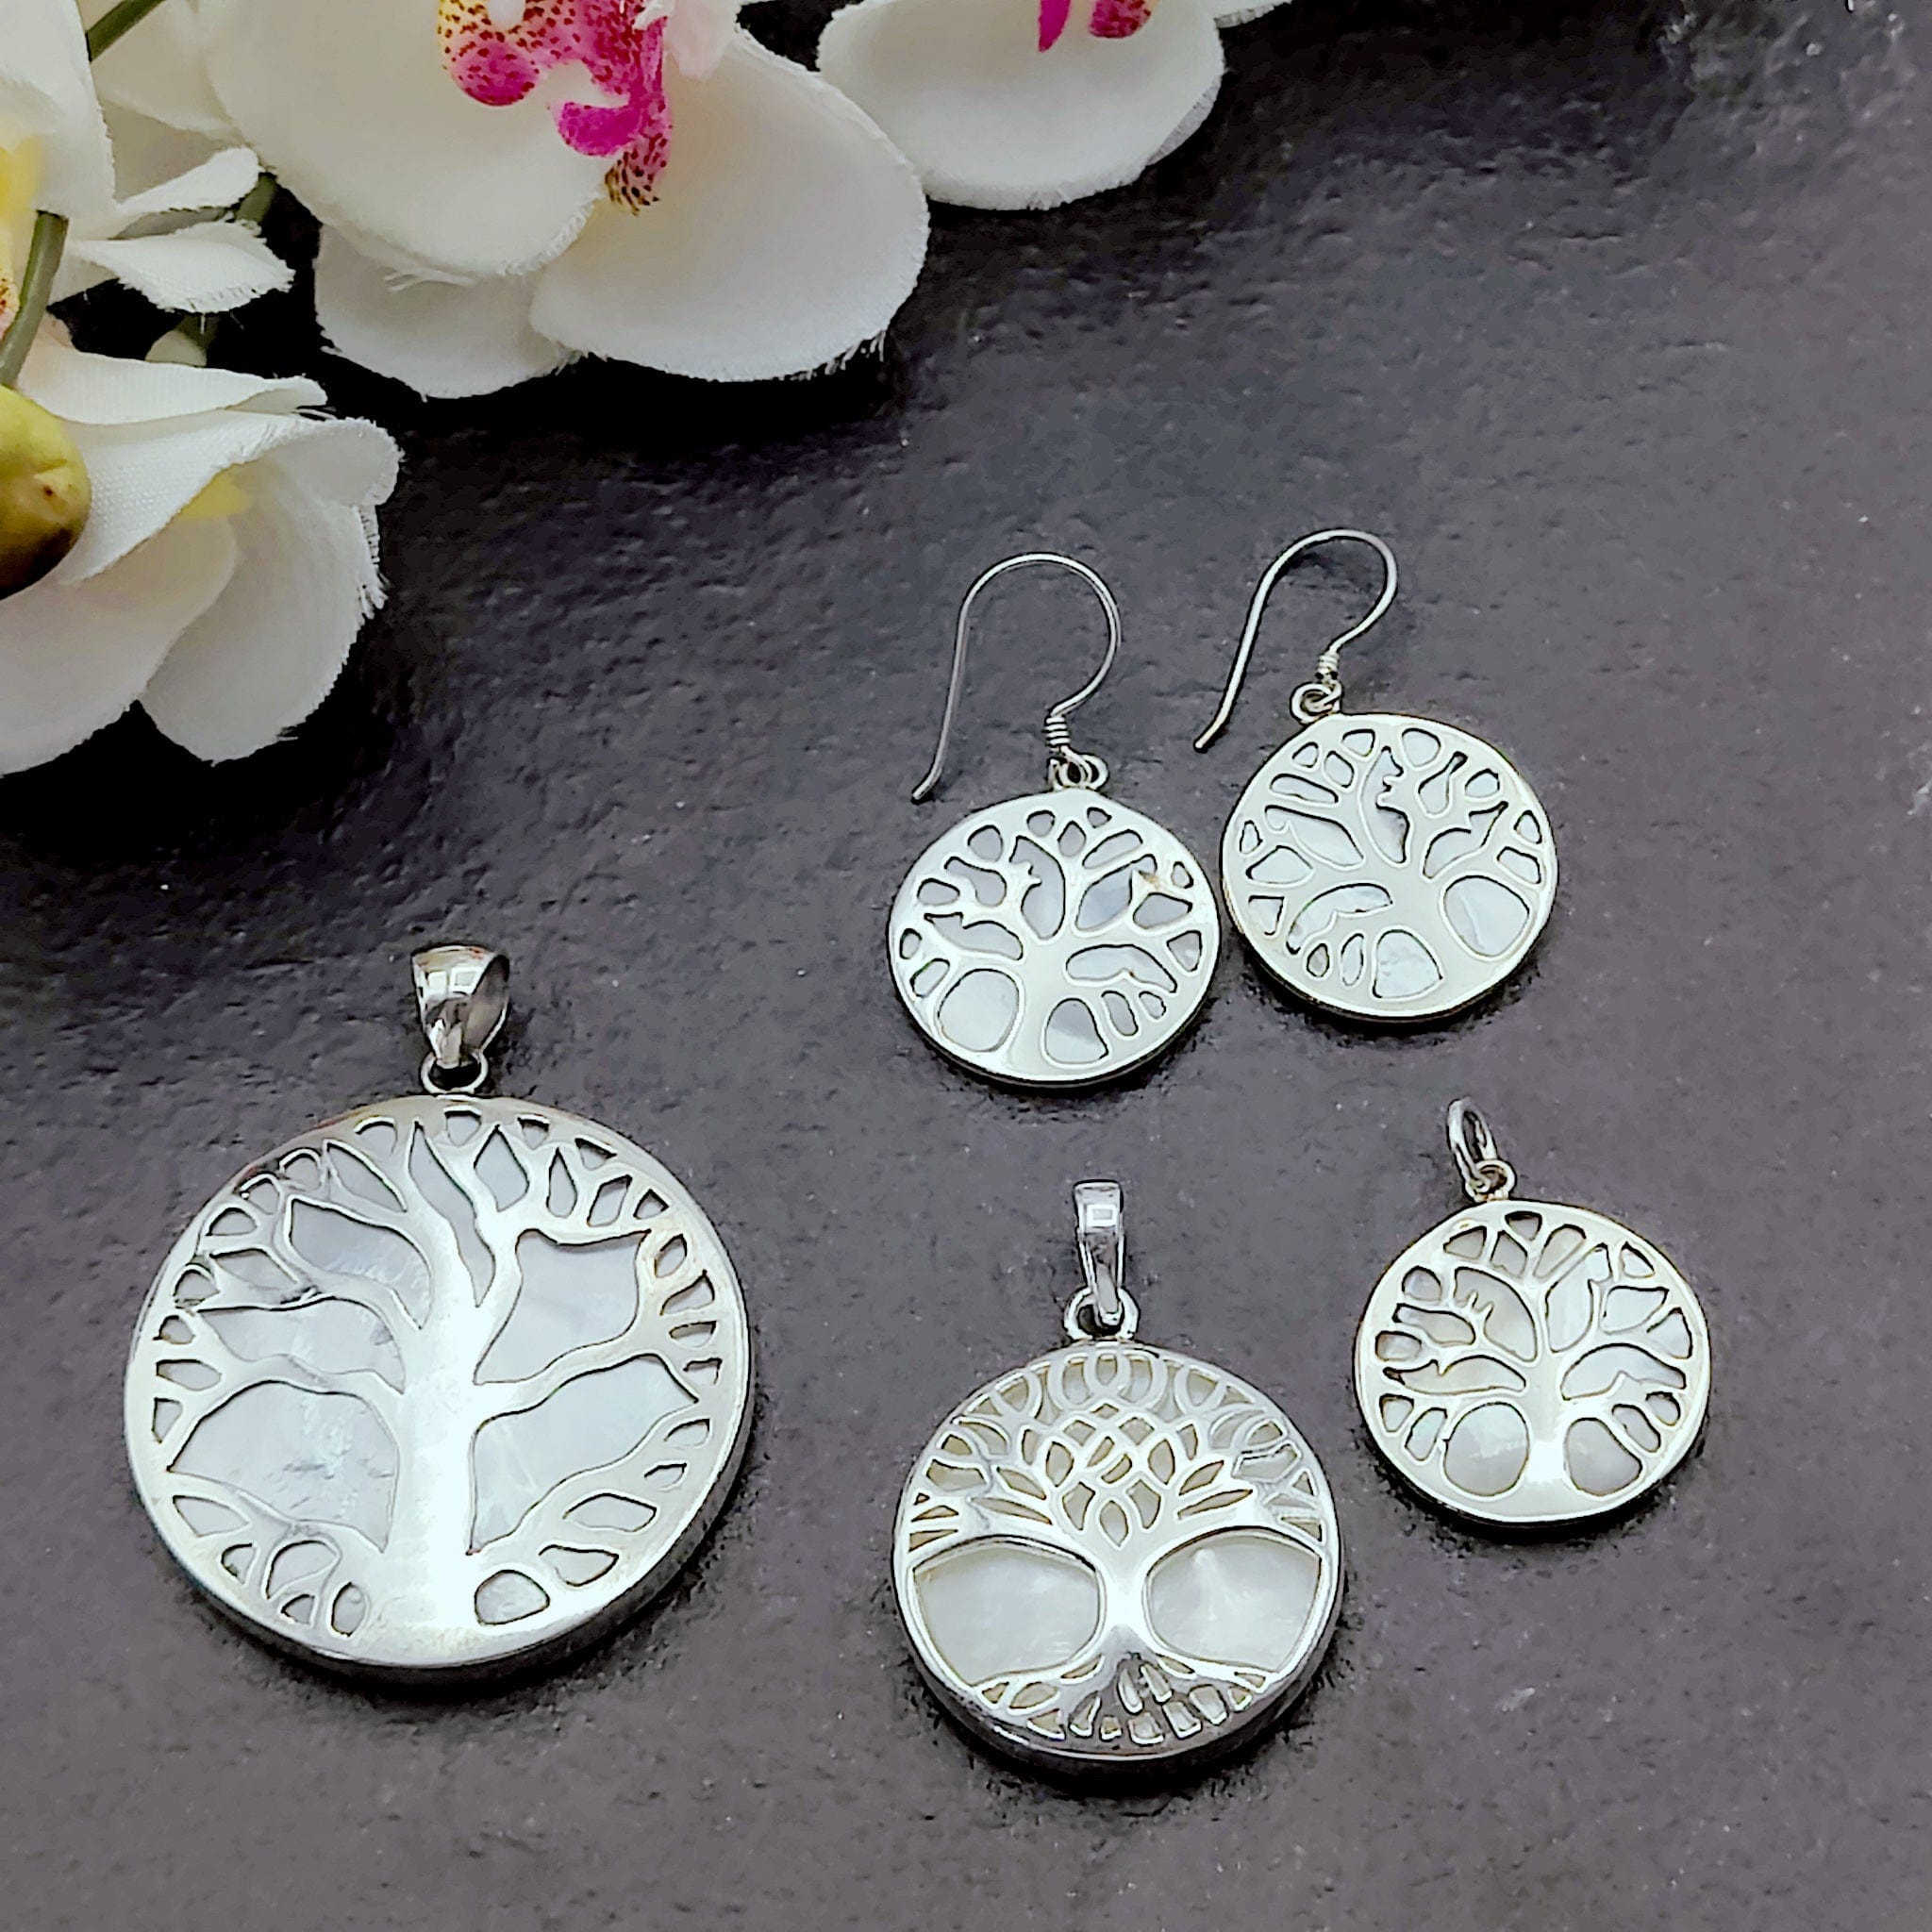 Hepburn and Hughes Mother of Pearl Pendant | 40mm Tree of Life Pendant | Sterling Silver | Free chain